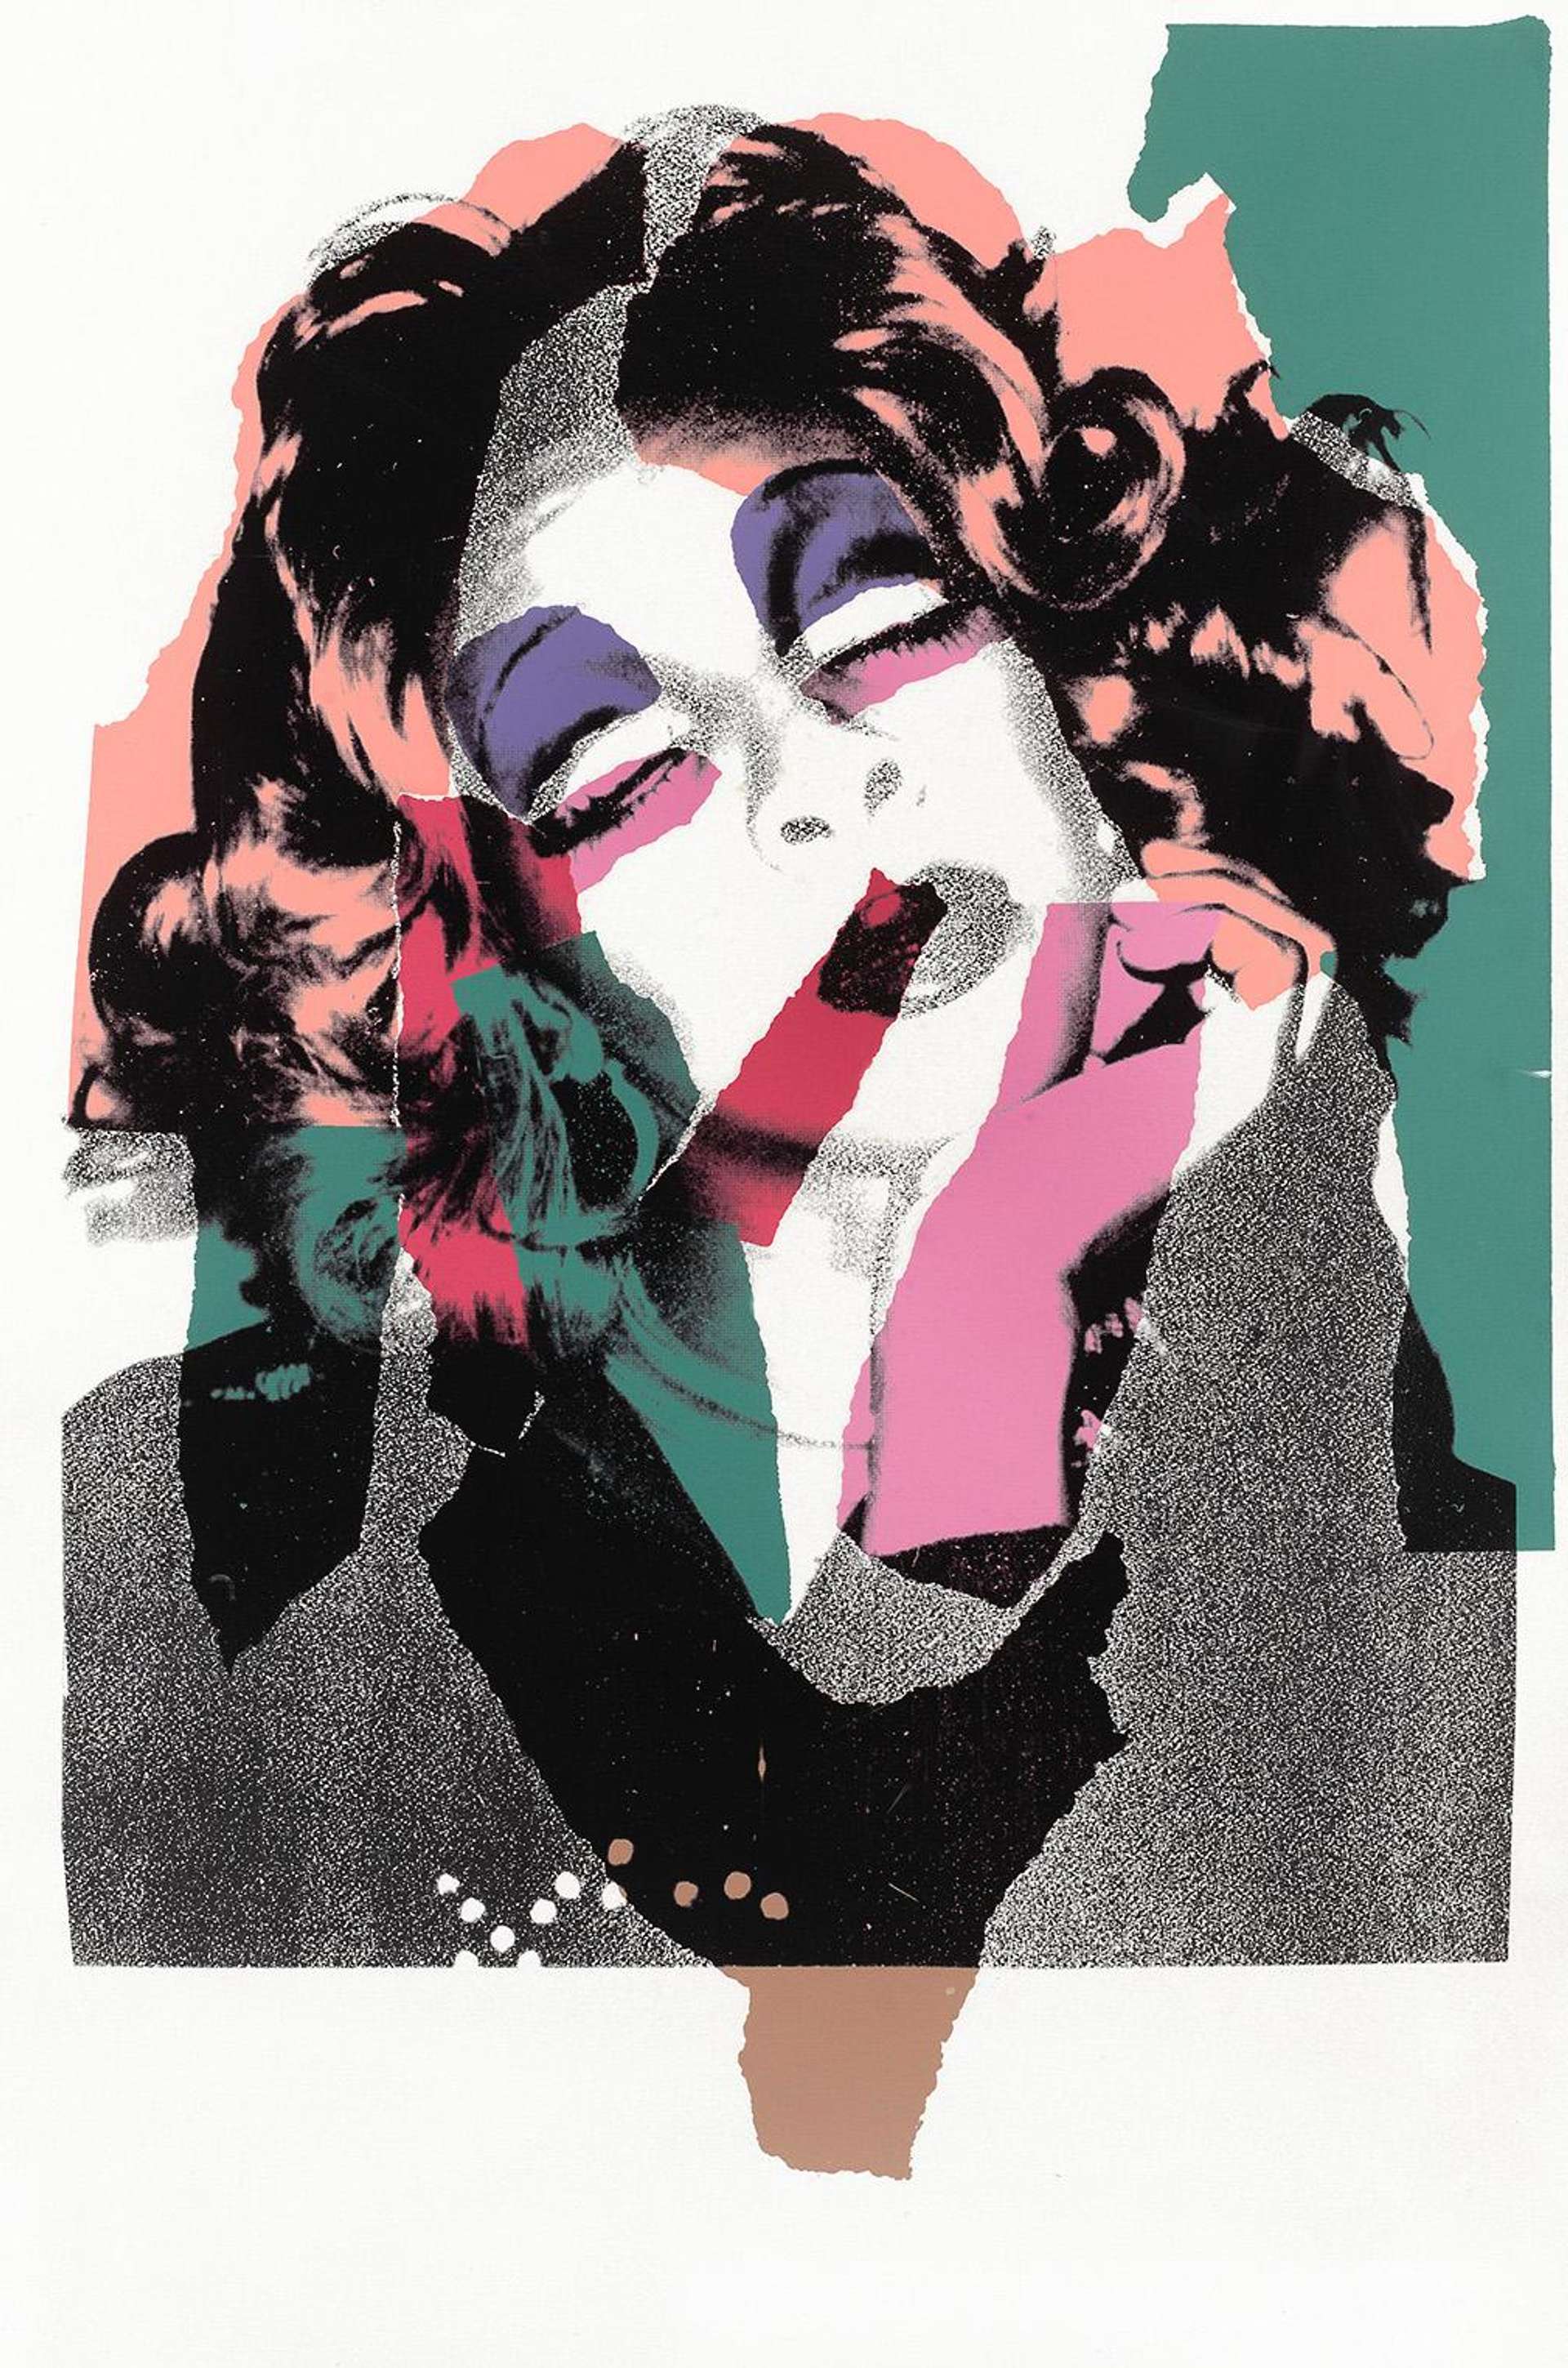 Andy Warhol’s Ladies And Gentlemen (F. & S. II.128). A Pop Art style black and white screen print of a woman with her hand resting below her chin.